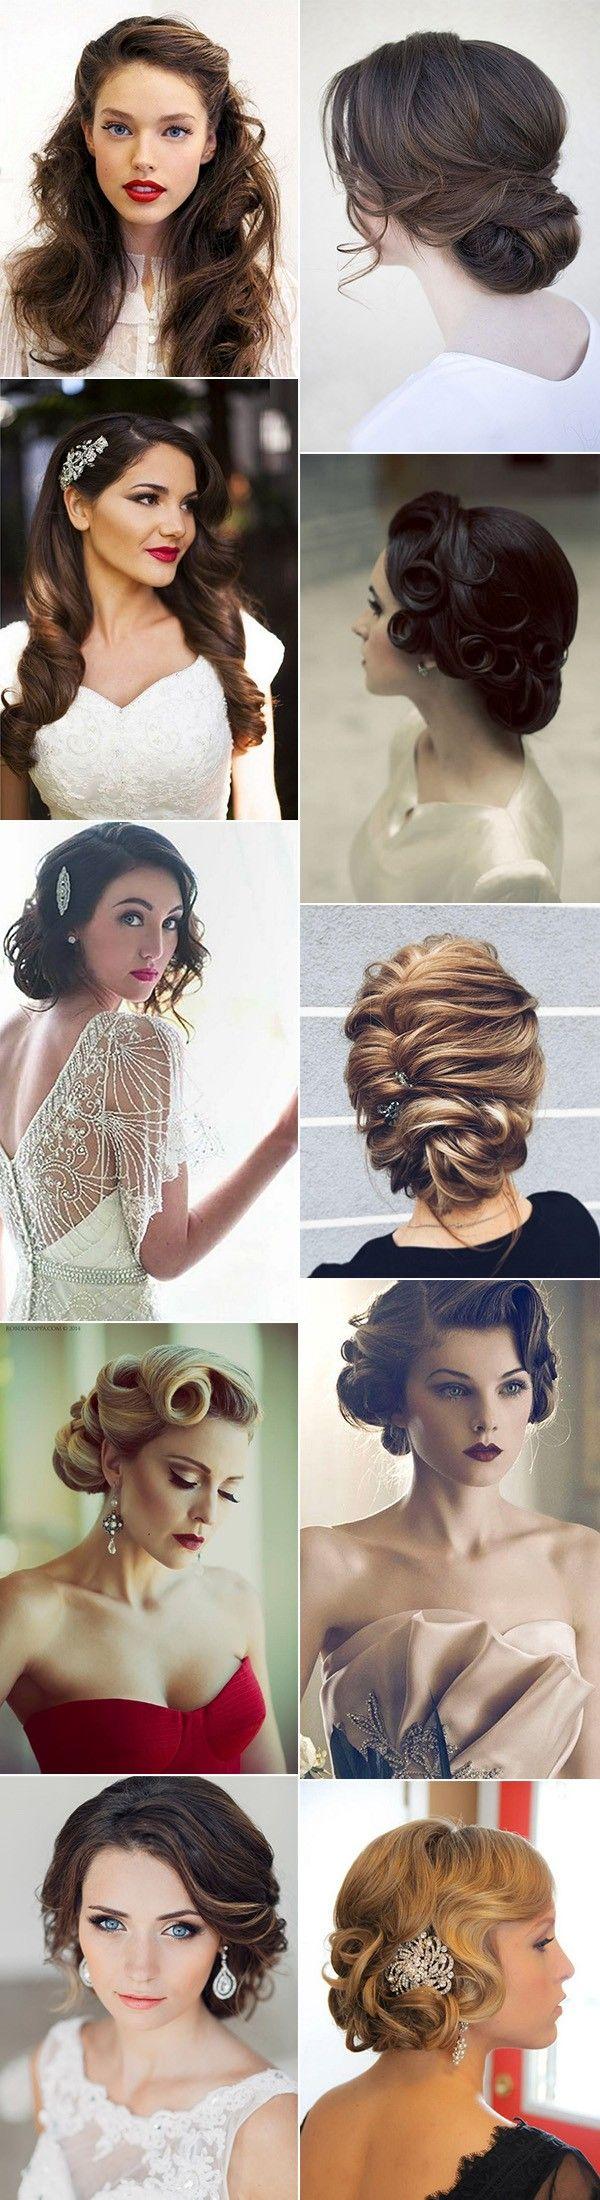 Wedding - Top 20 Vintage Wedding Hairstyles For Brides - Page 2 Of 3